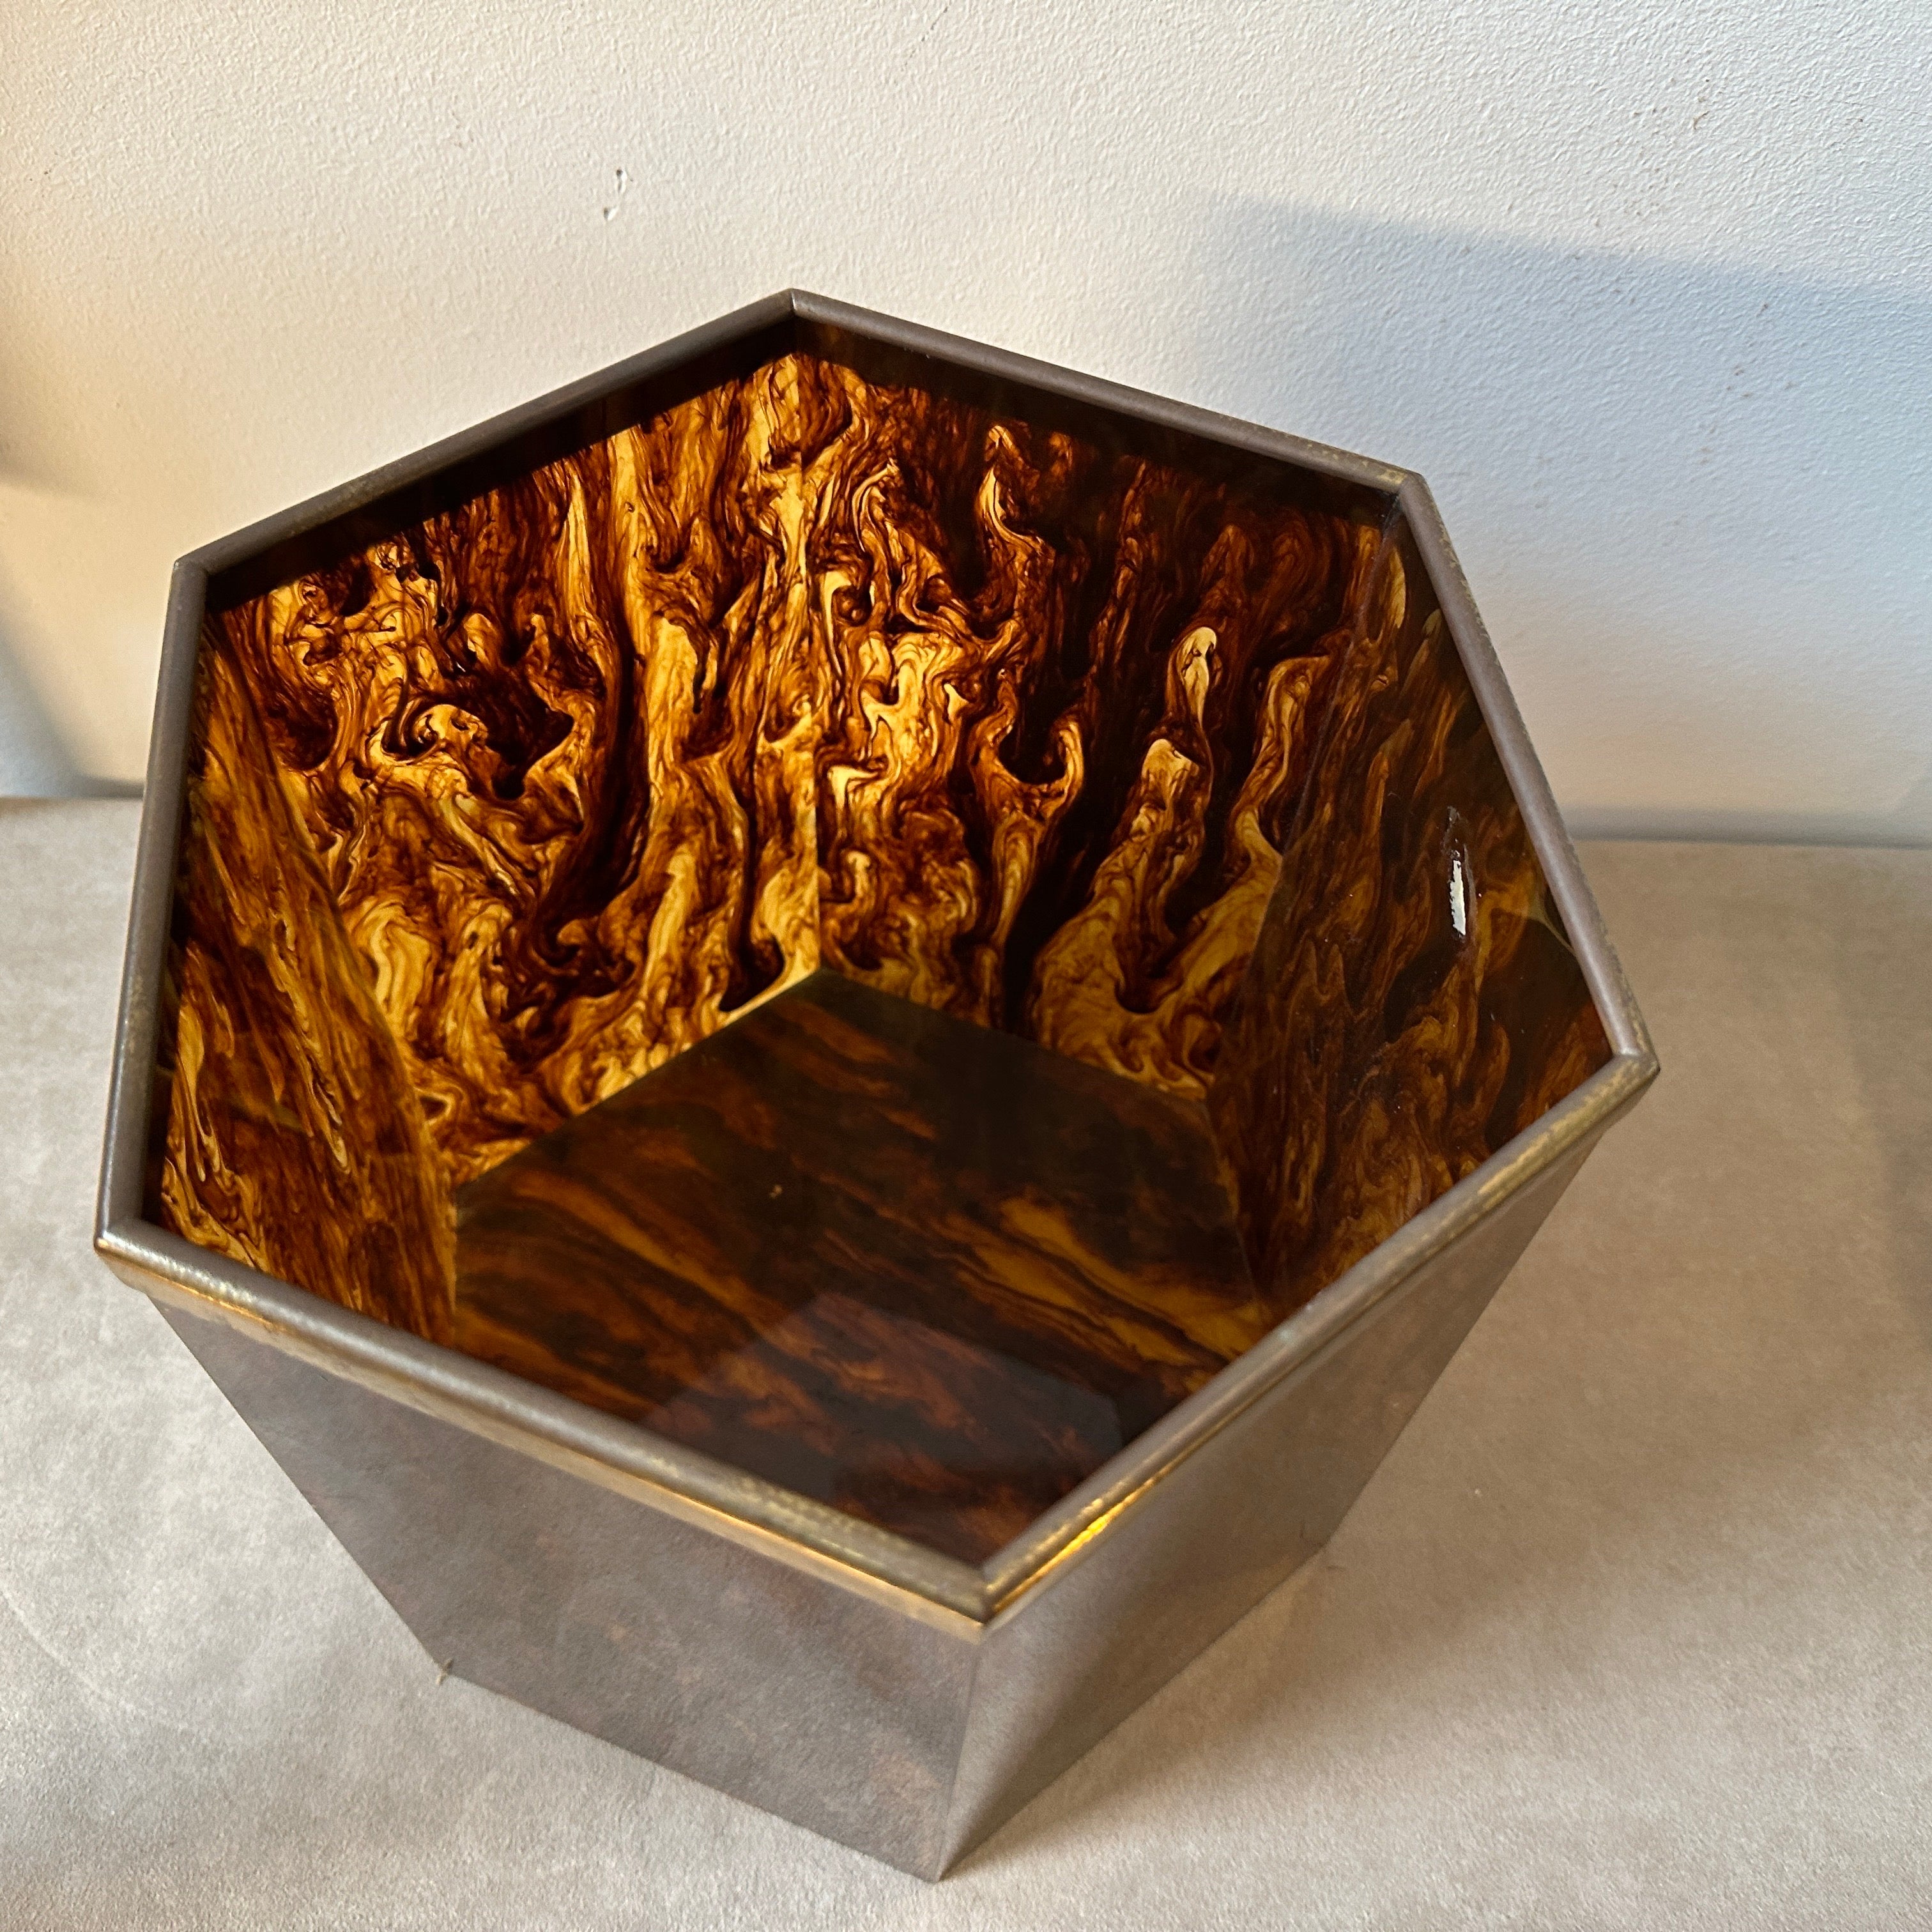 An hexagonal fake tortoise shell lucite and brass centerpiece designed and manufactured in Italy in the Seventies, it's in original conditions with small signs of use and age and brass in original patina. it was used as an amazing double wine